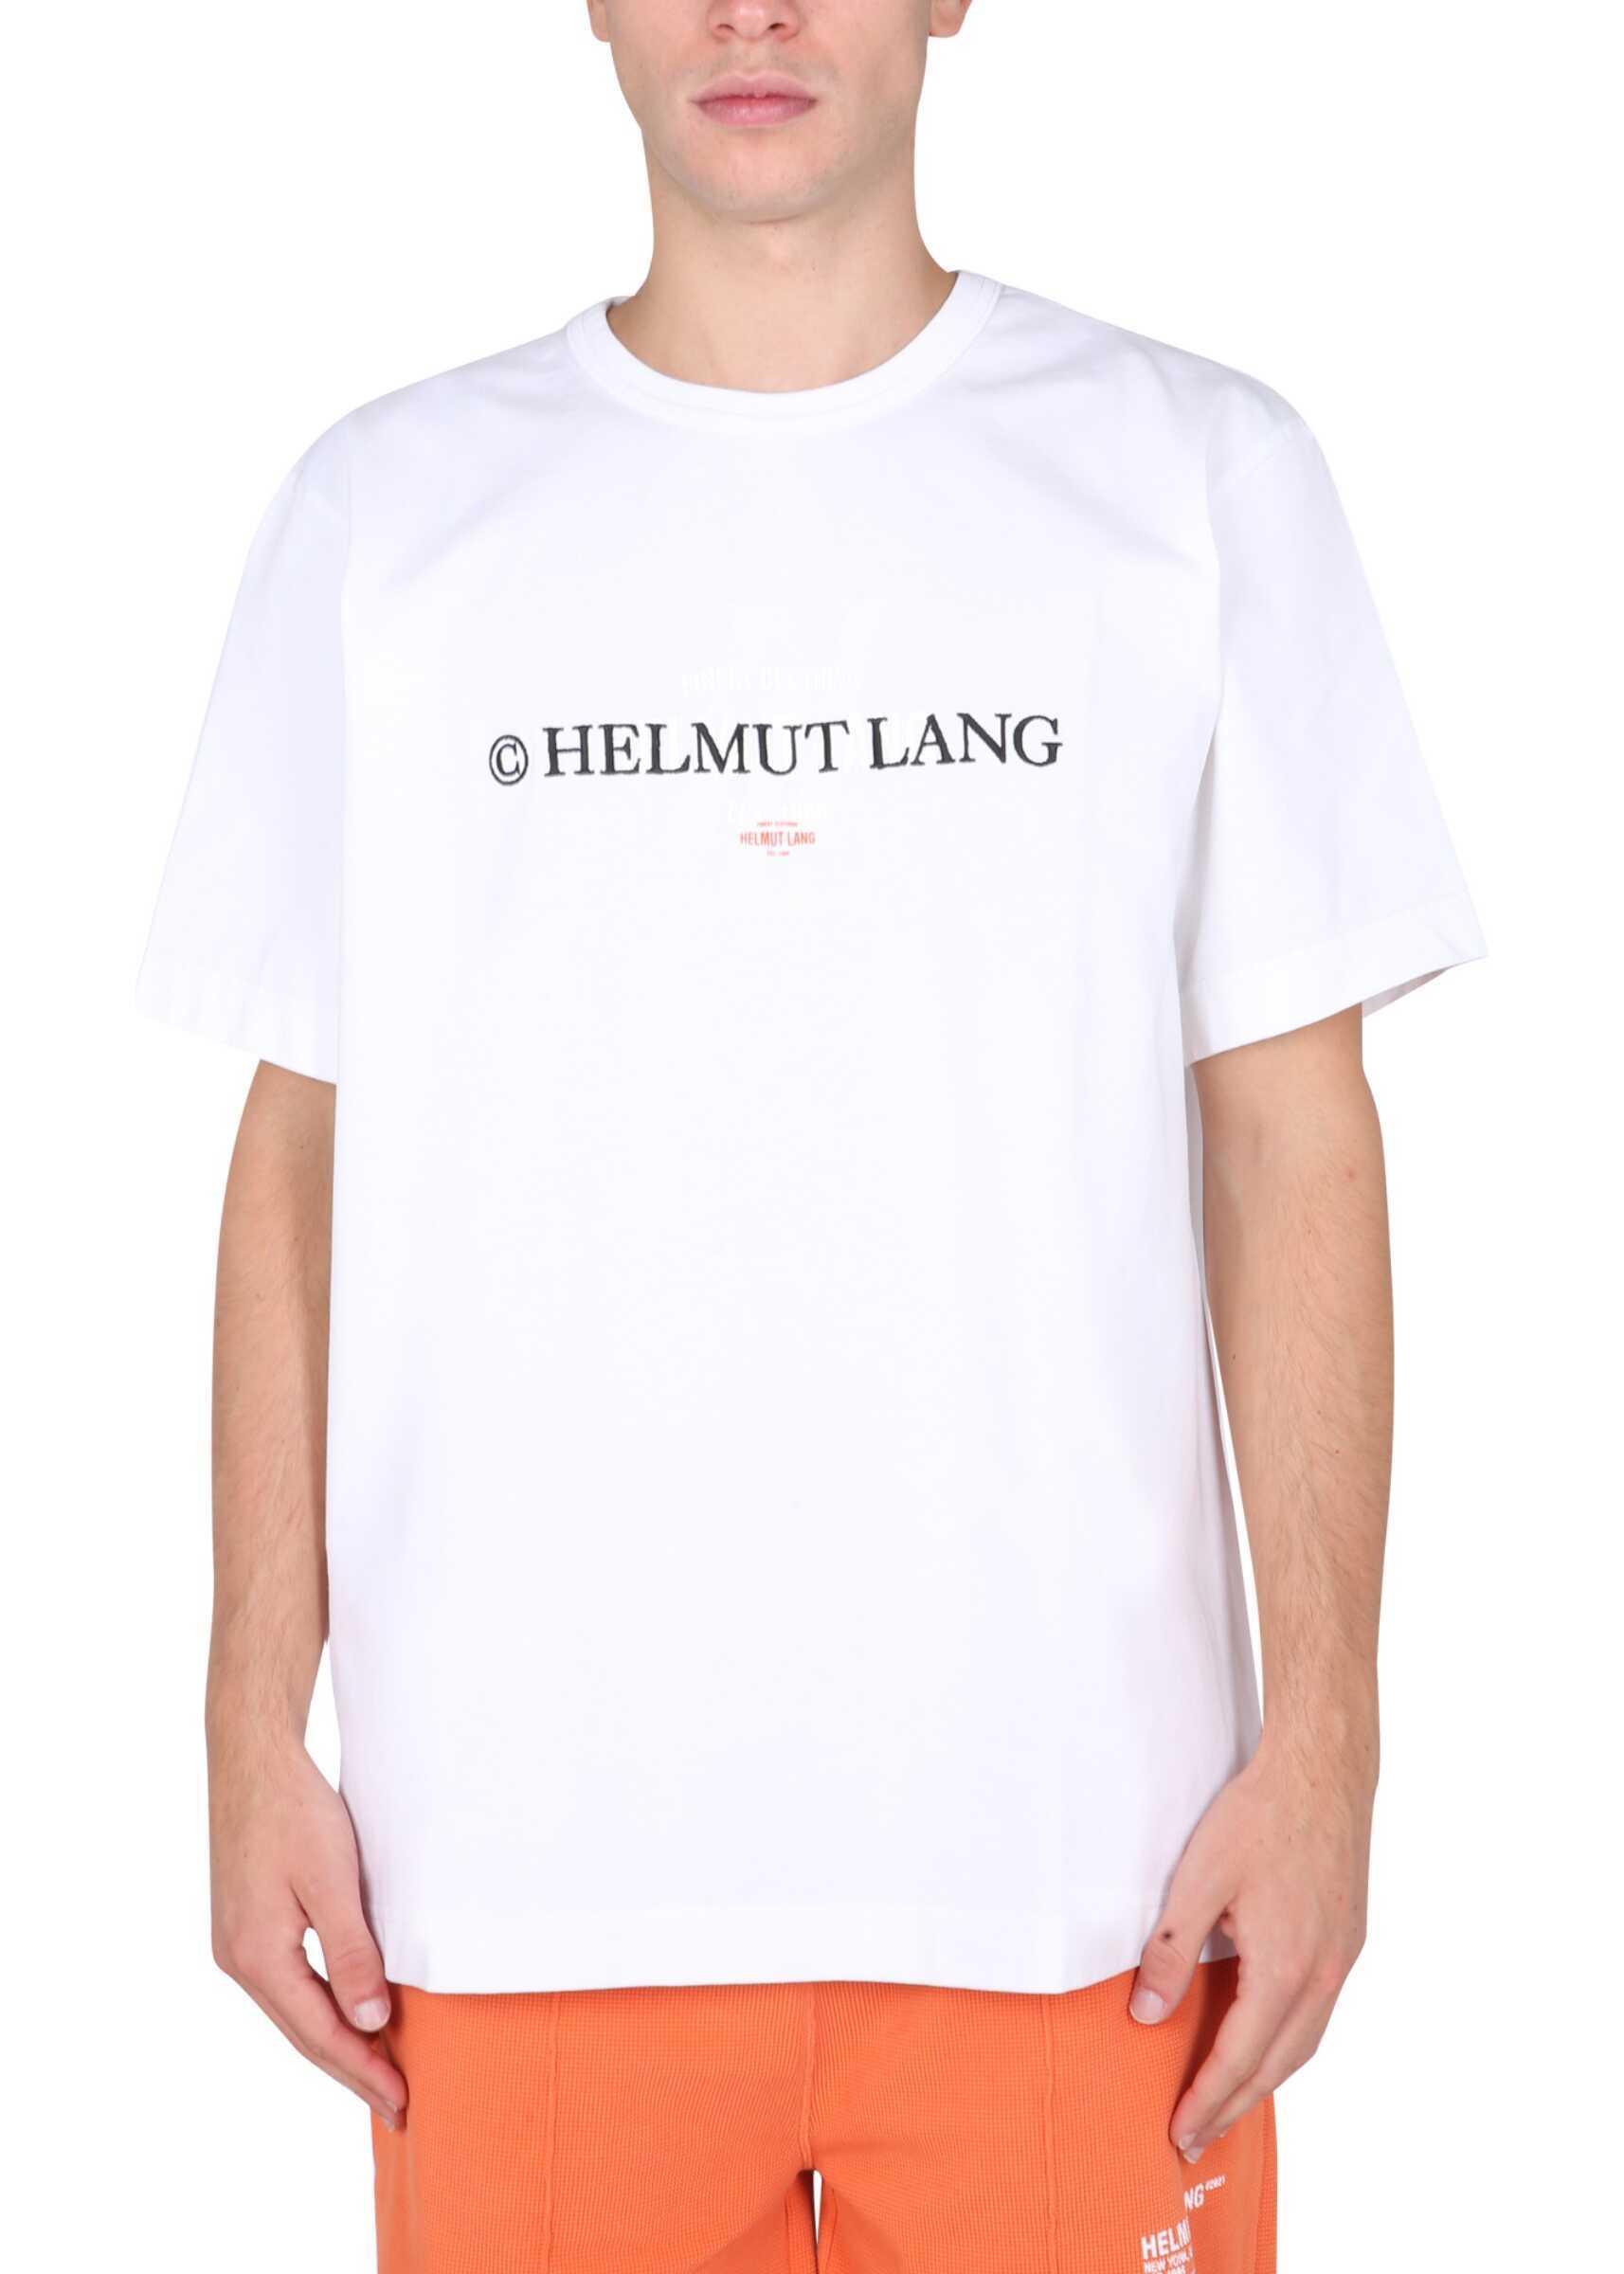 HELMUT LANG T-Shirt With Layered Logo L06HM512_100 WHITE